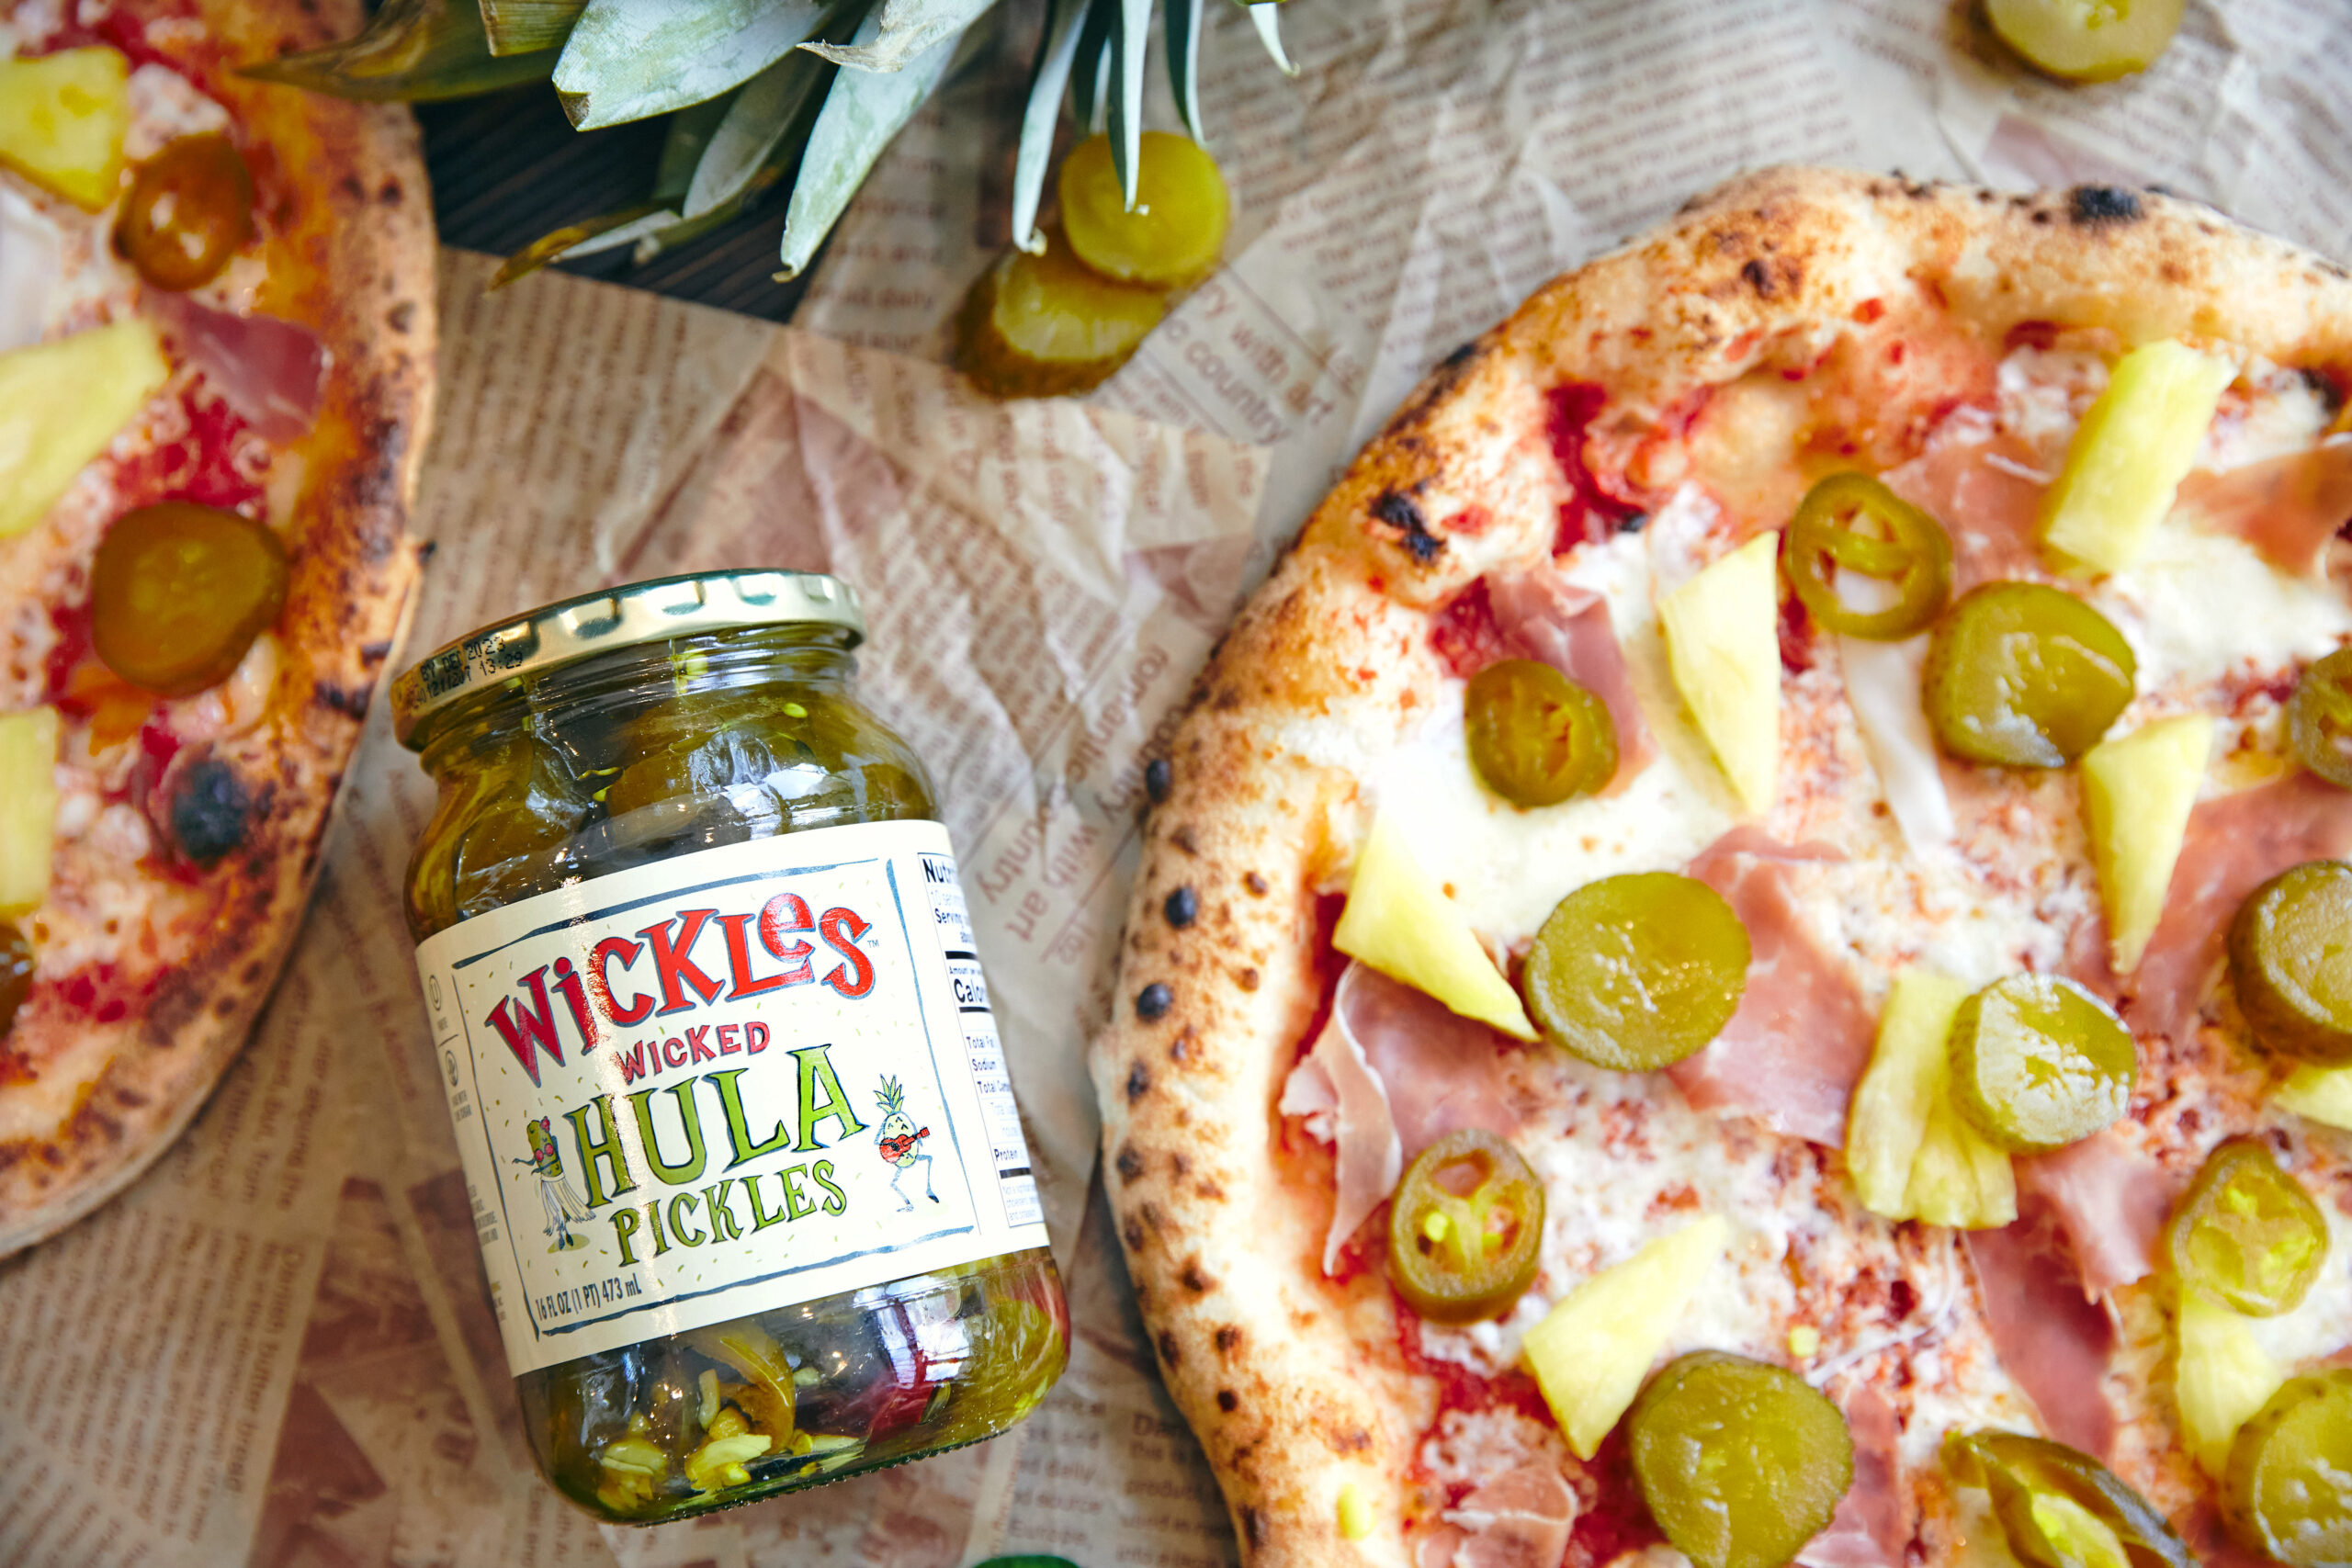 Closeup of a jar of wickles hula pickles next to pizza topped with wickles hula pickles